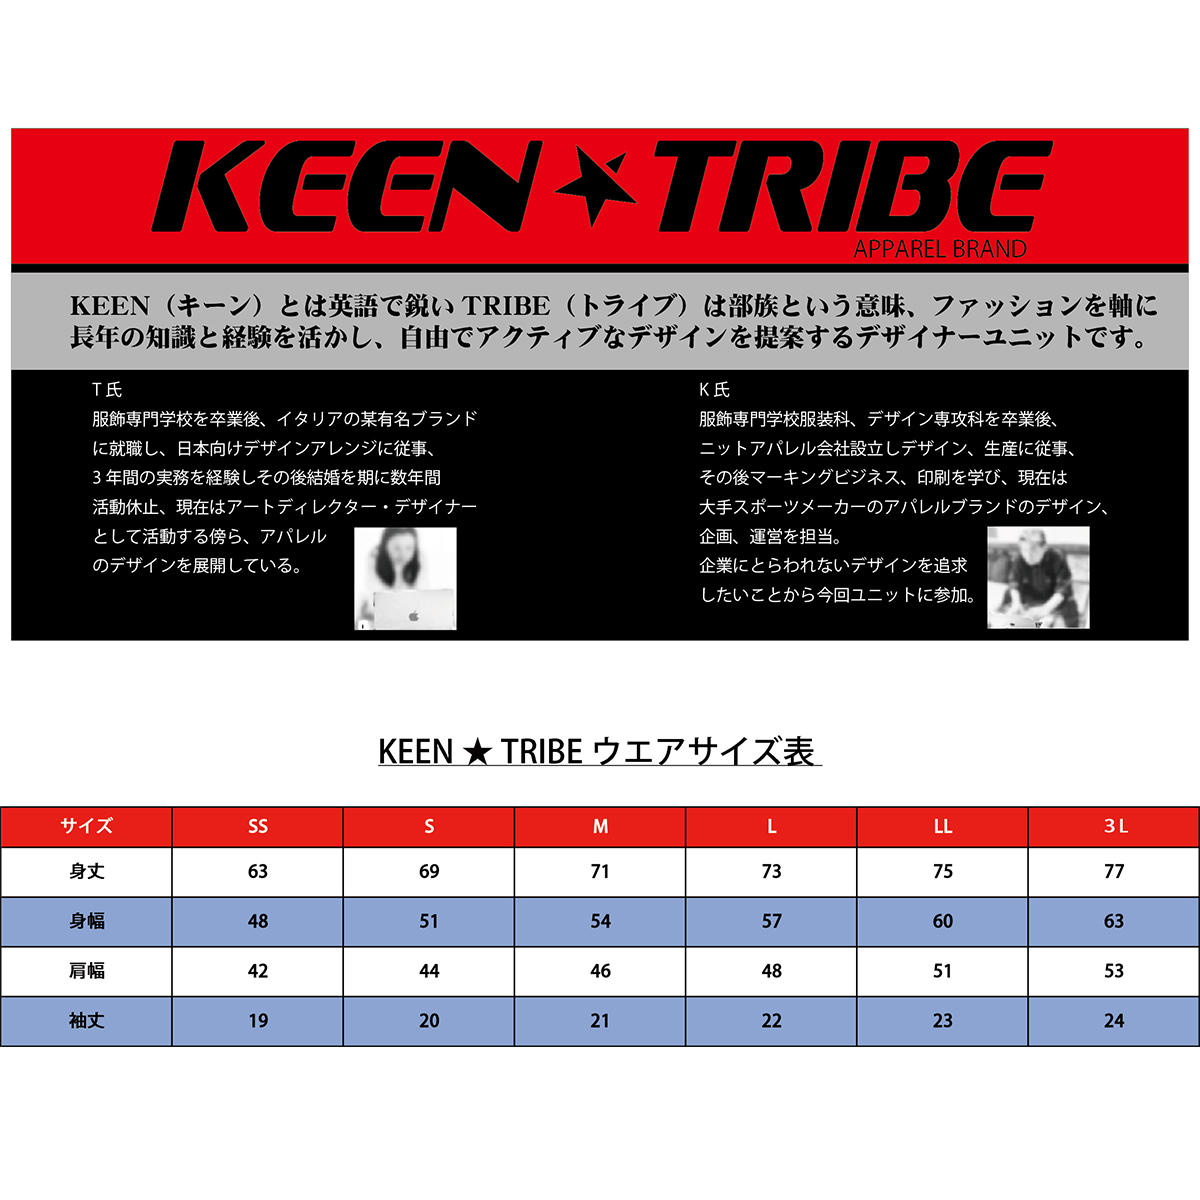 KEEN ★ TRIBE　KT-35(受注生産)